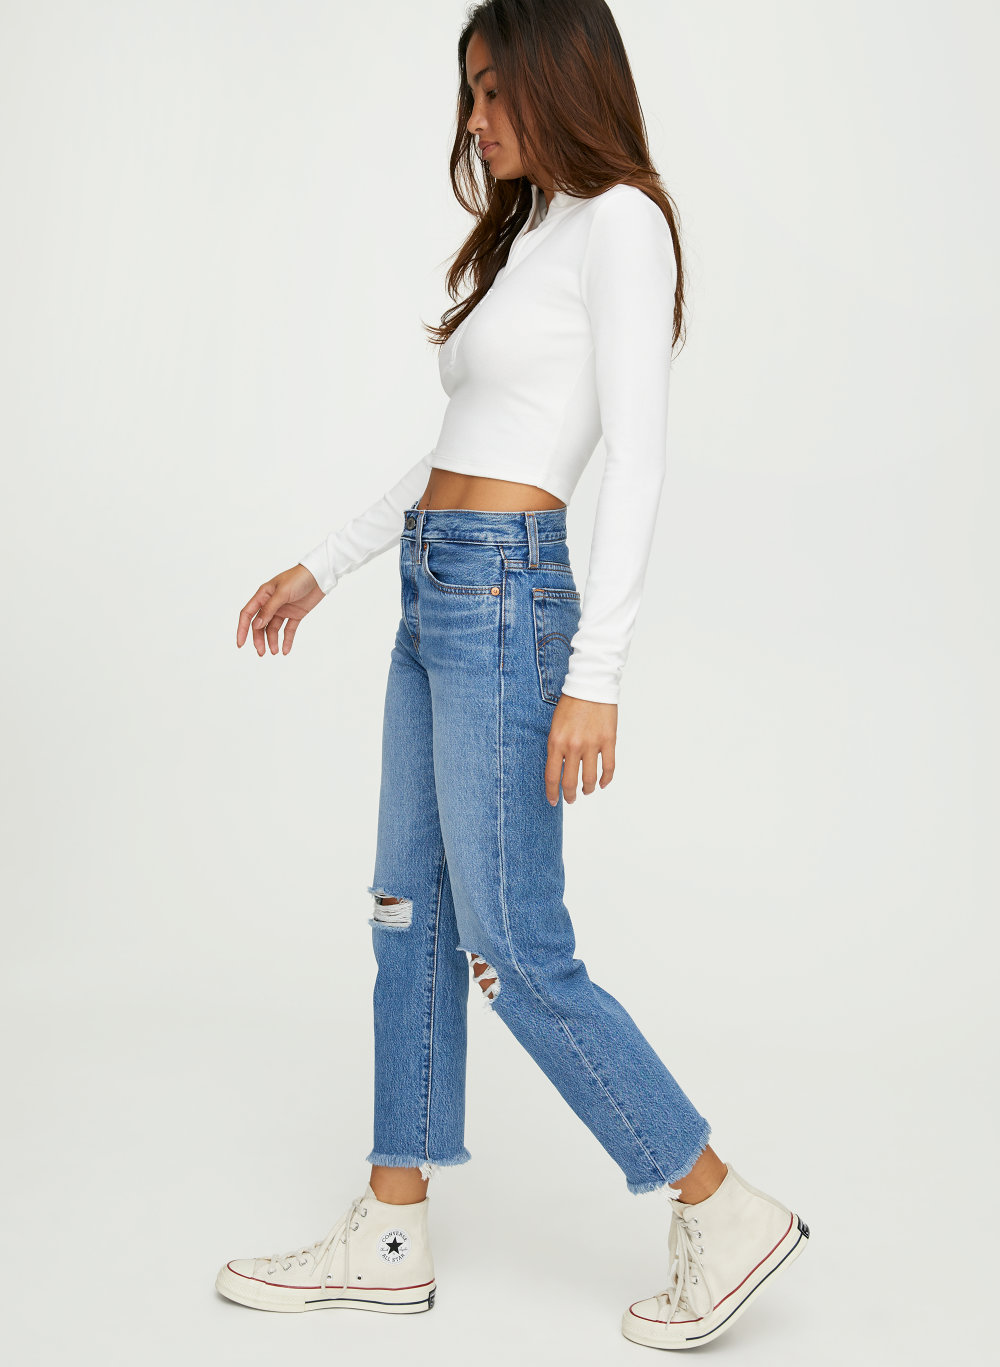 Levi's Wedgie Straight Ripped Jeans Flash Sales, SAVE 46% -  